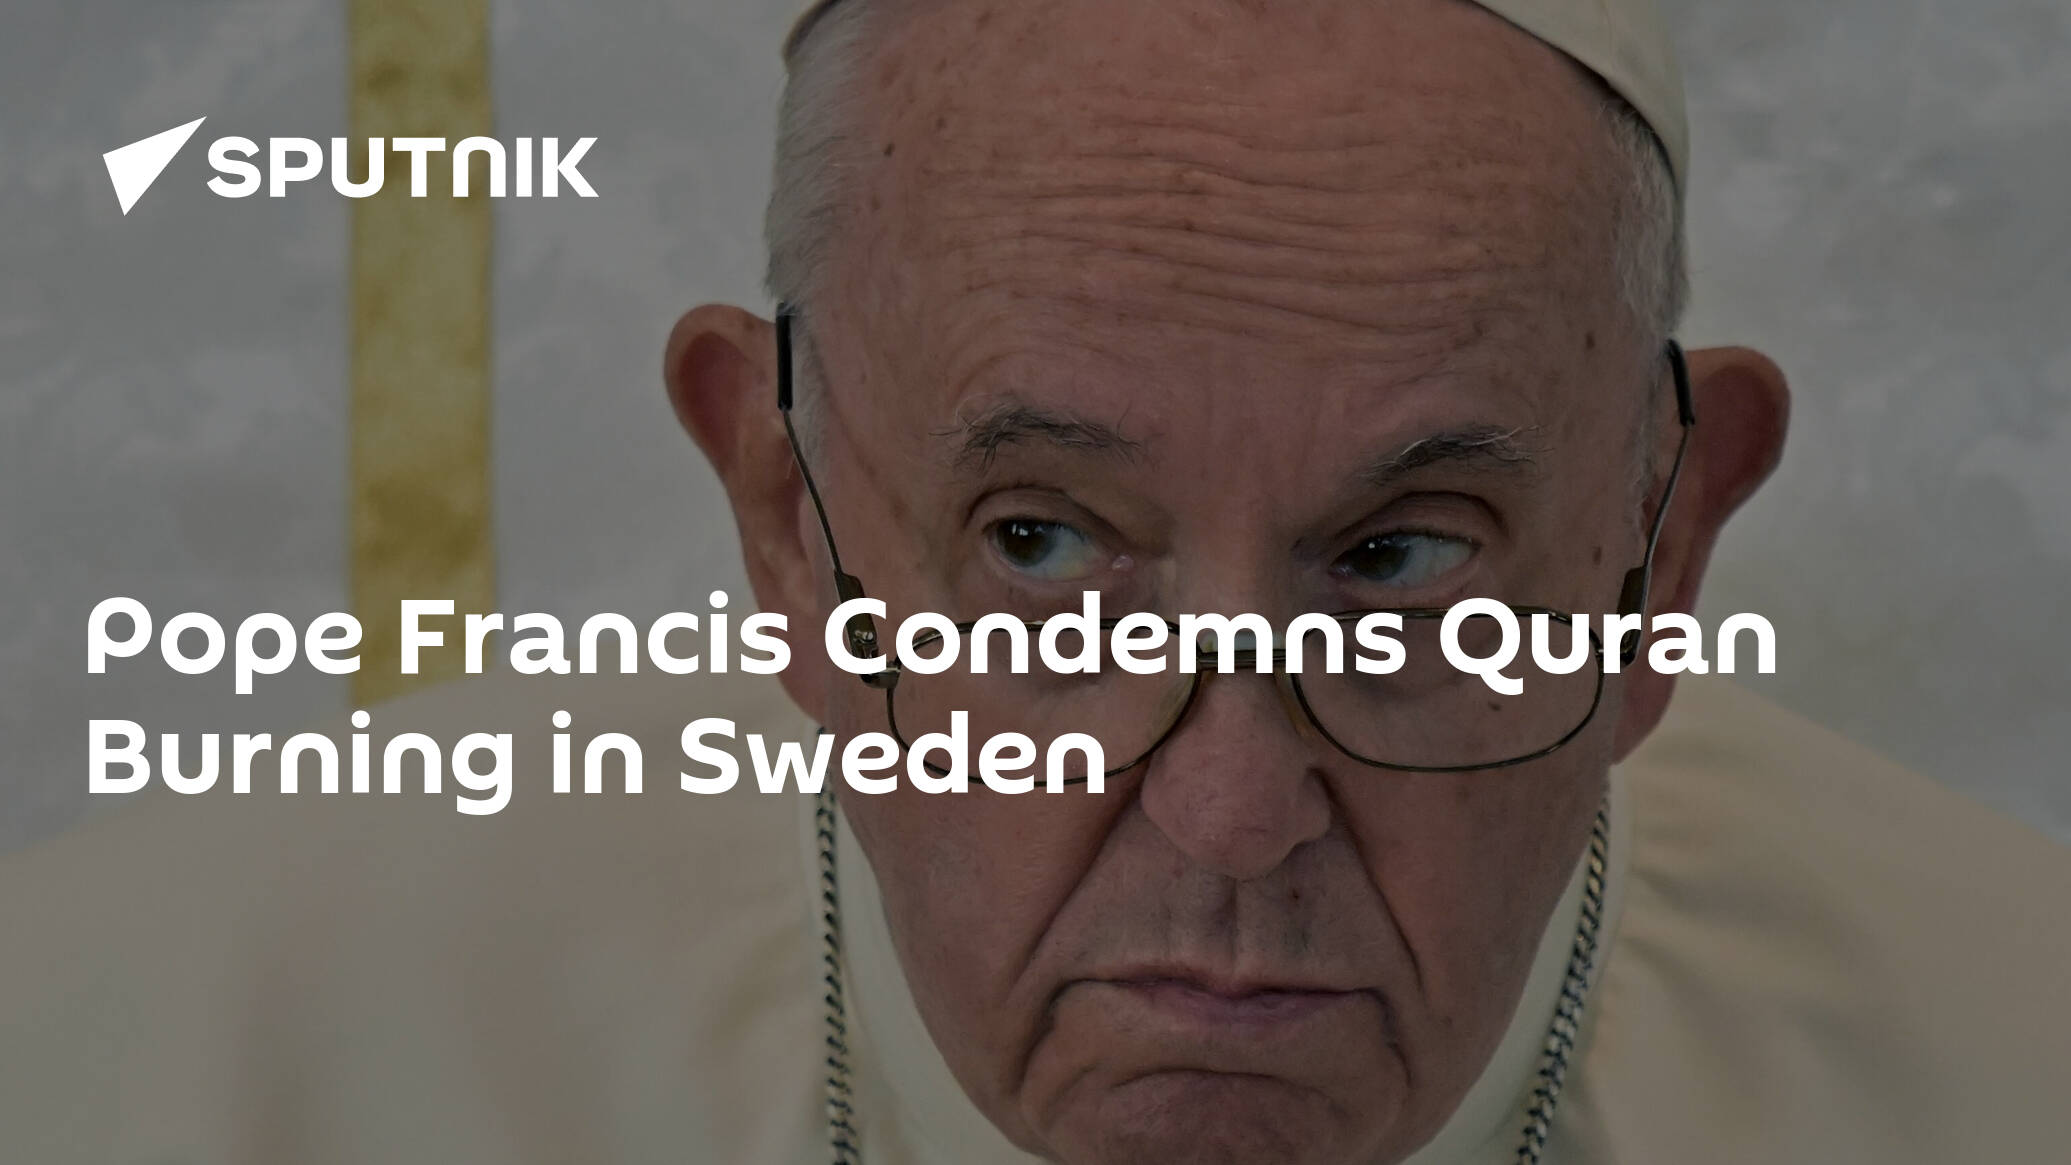 Pope Francis Condemns Quran Burning in Sweden